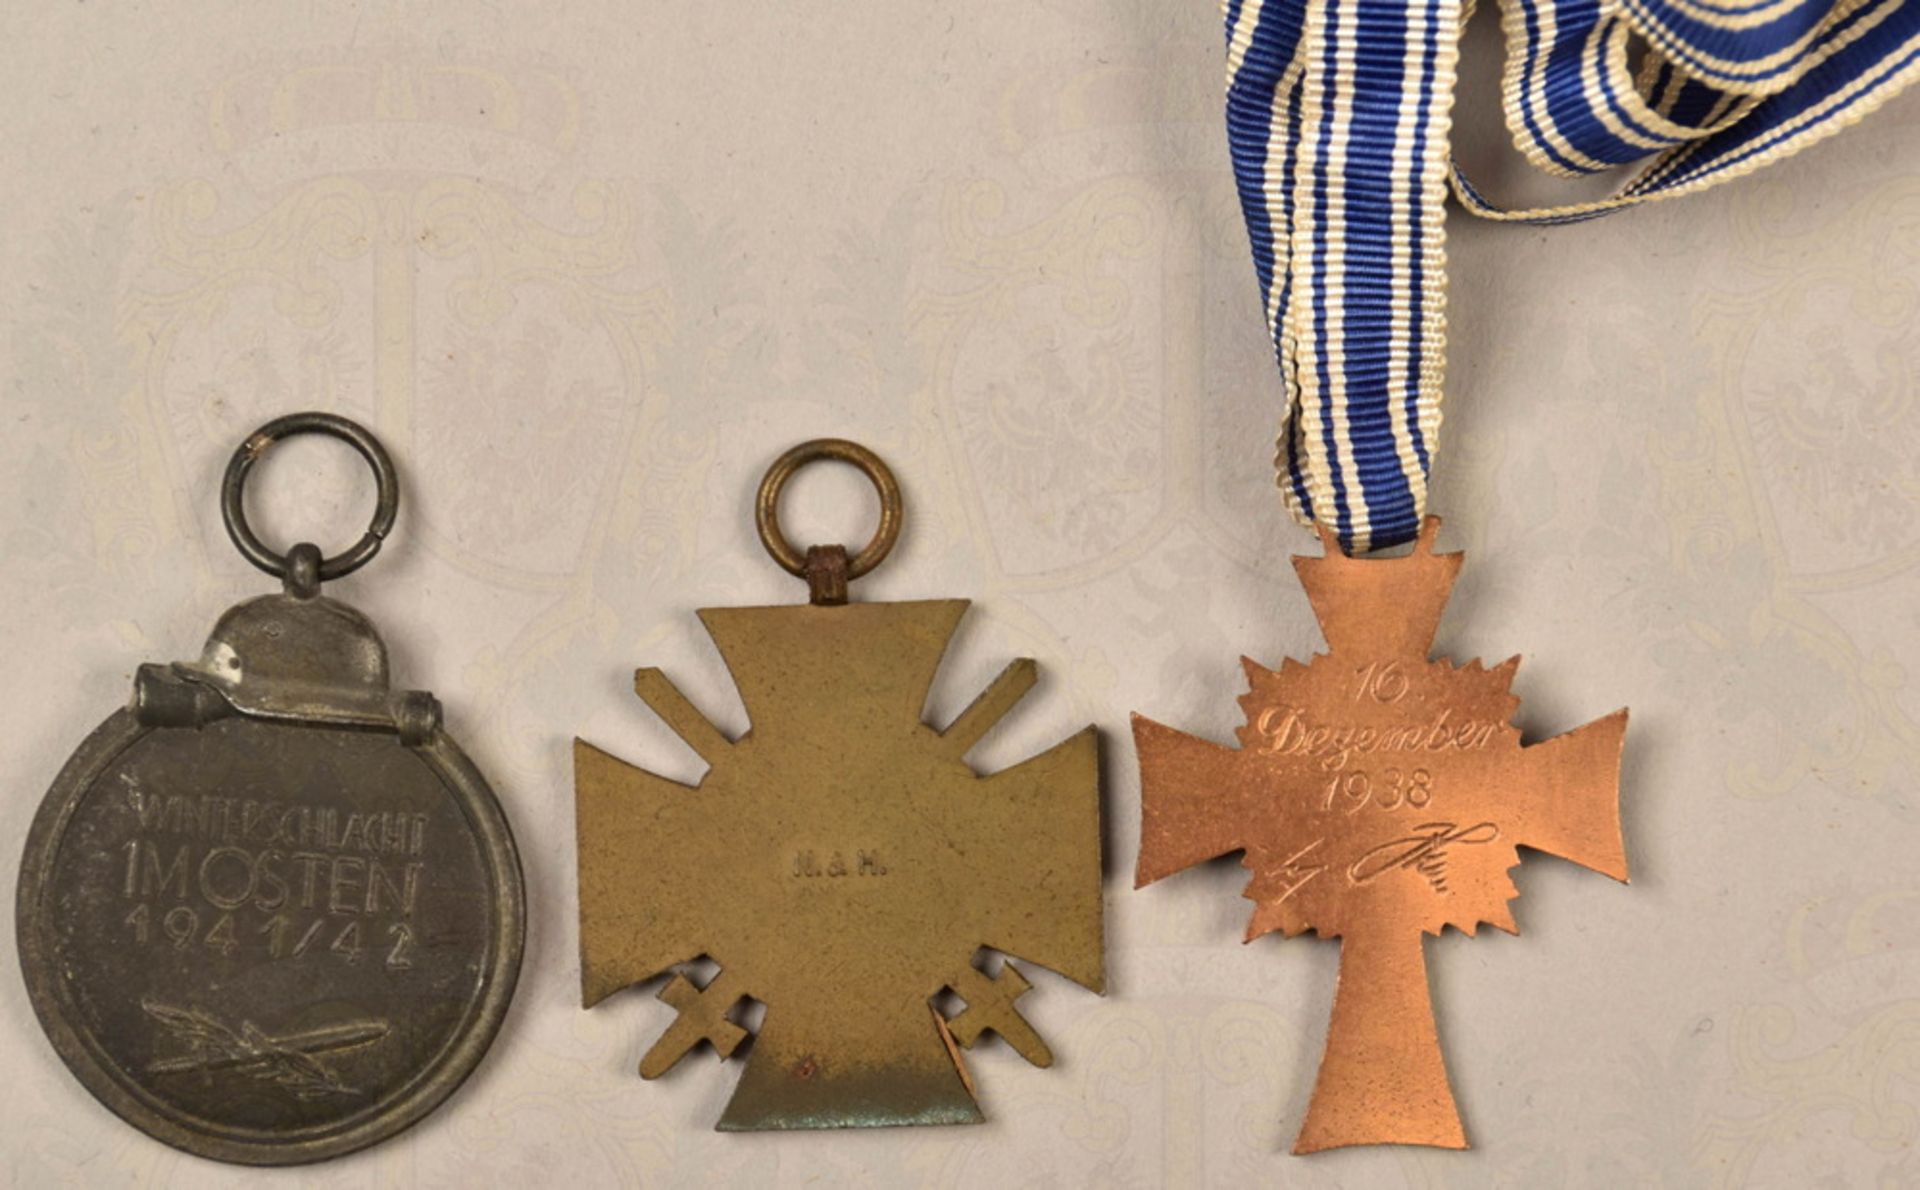 3 Third Reich medals and Iron Cross ribbon - Image 3 of 3